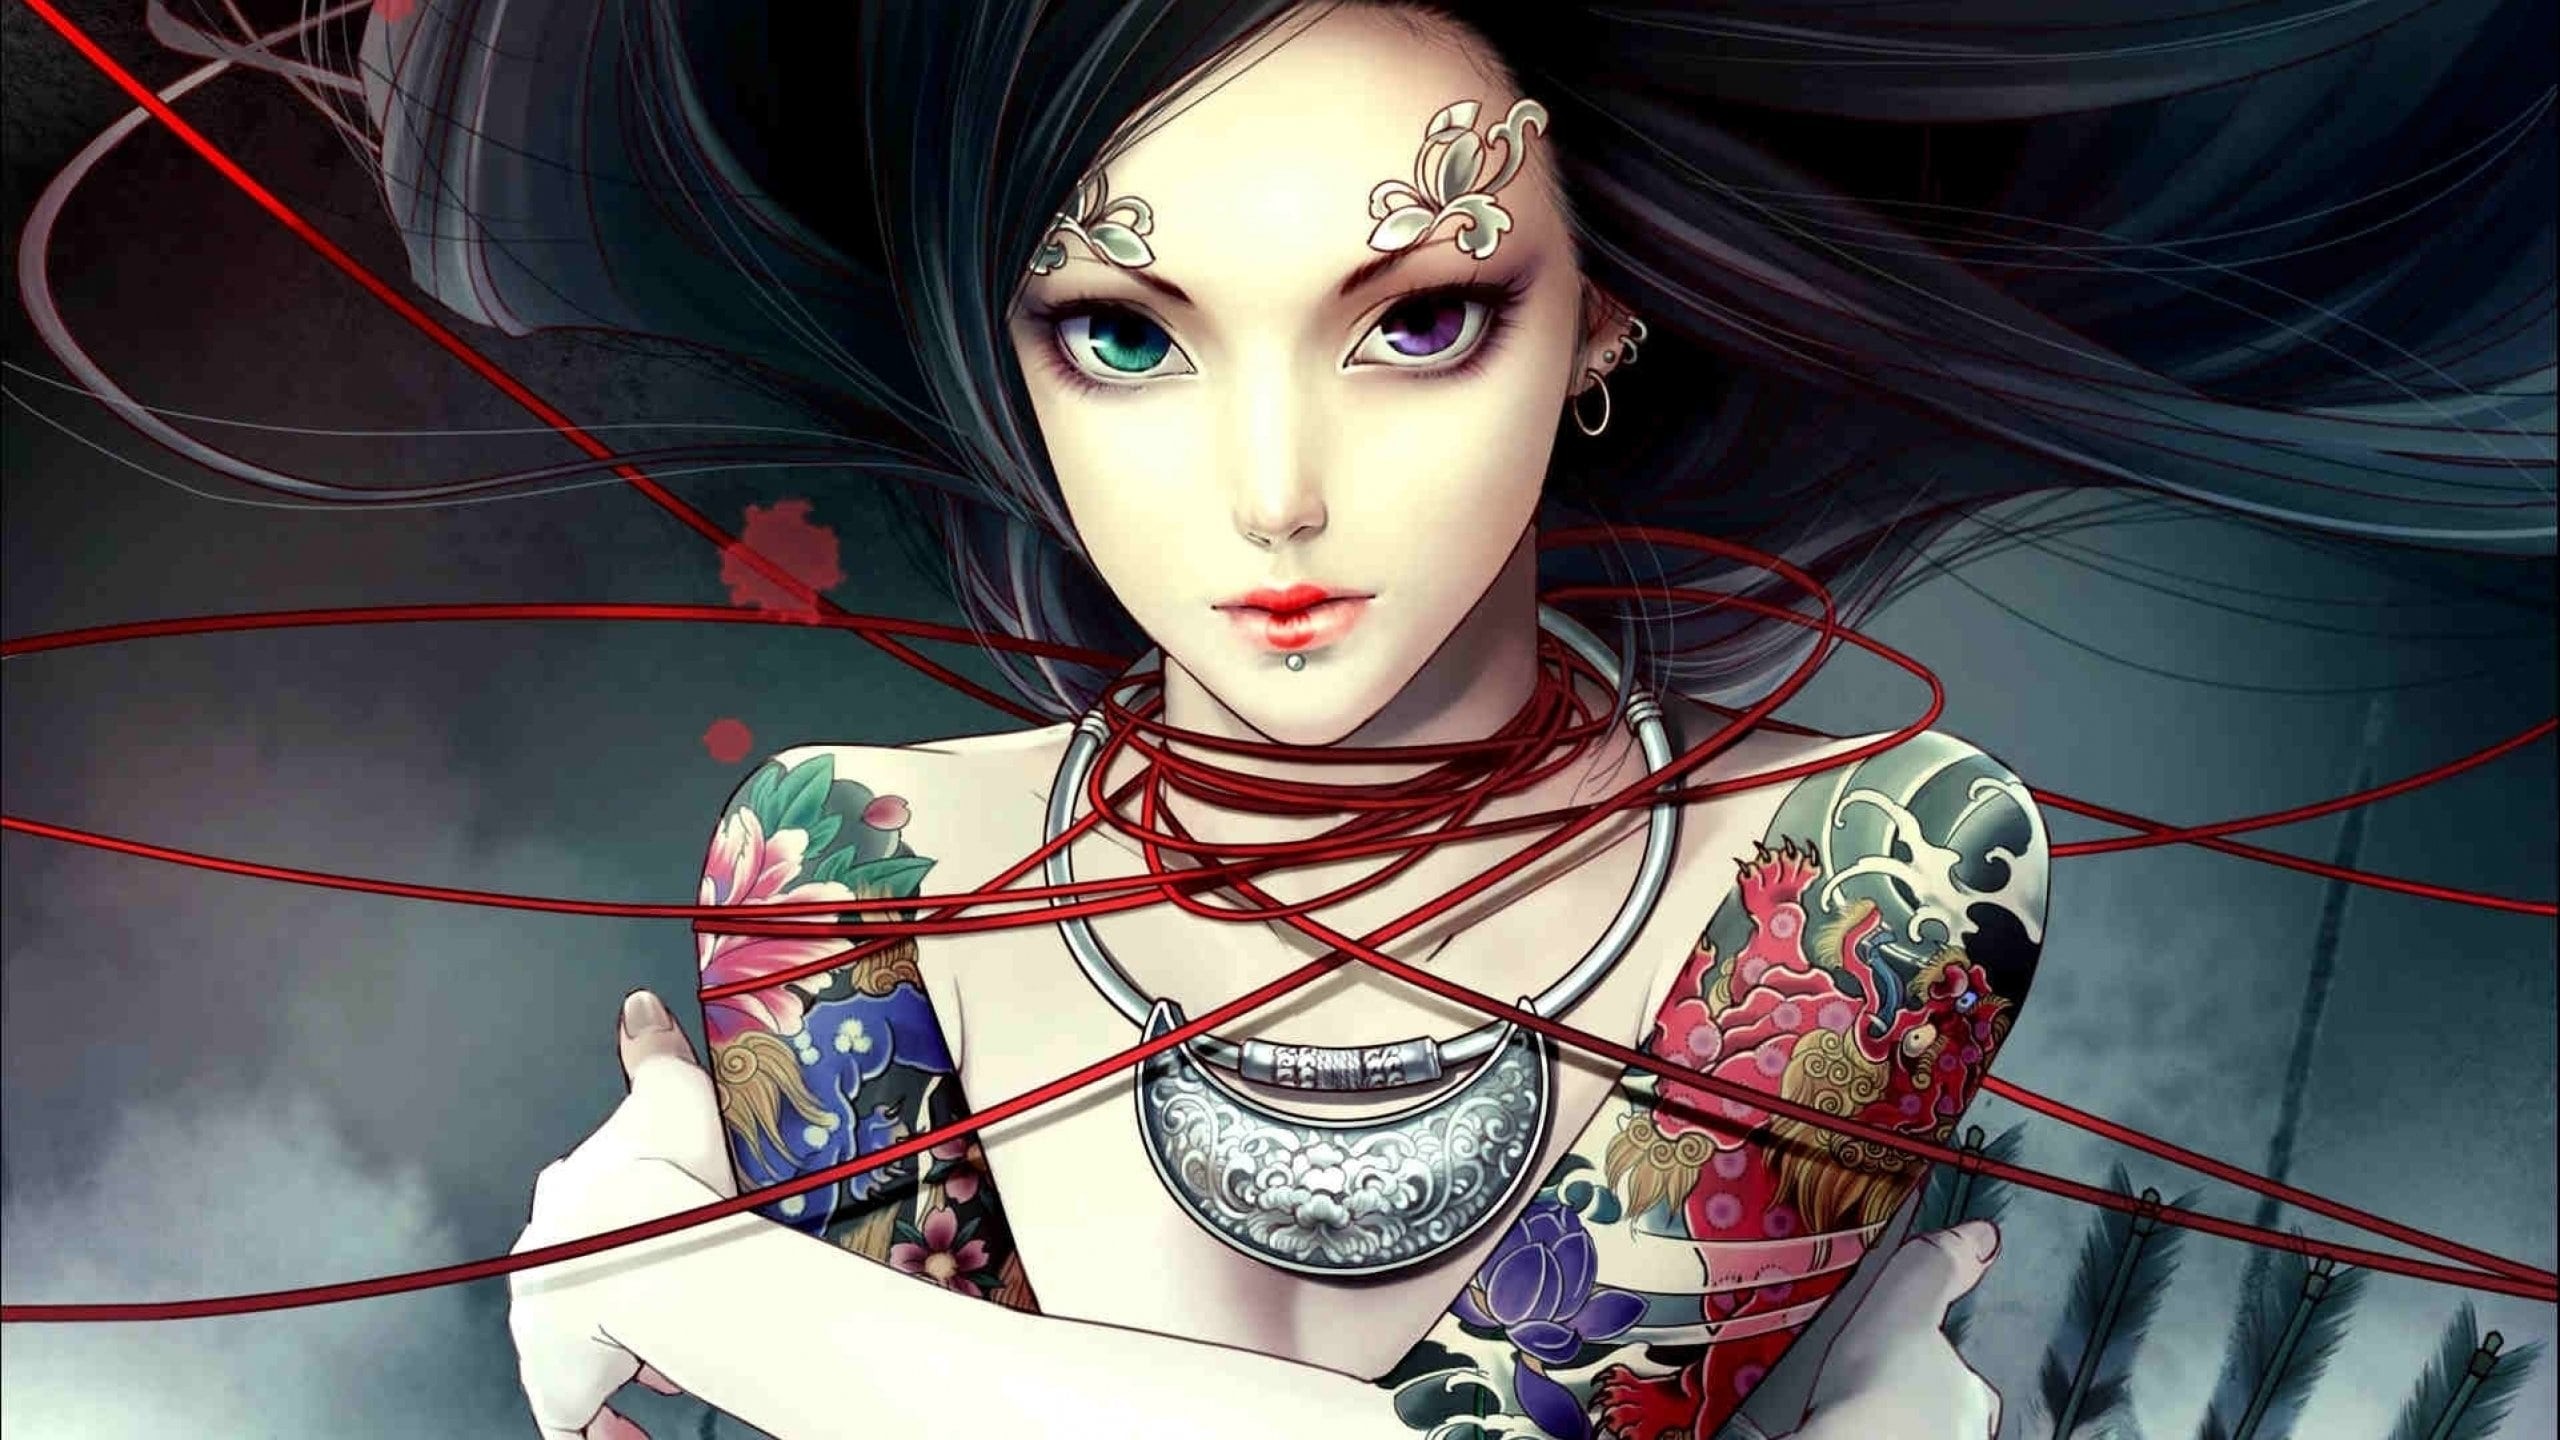 2560x1440 Fantasy girl awesome artwork tattoo wallpaper #1248 CoolWallpapers.site